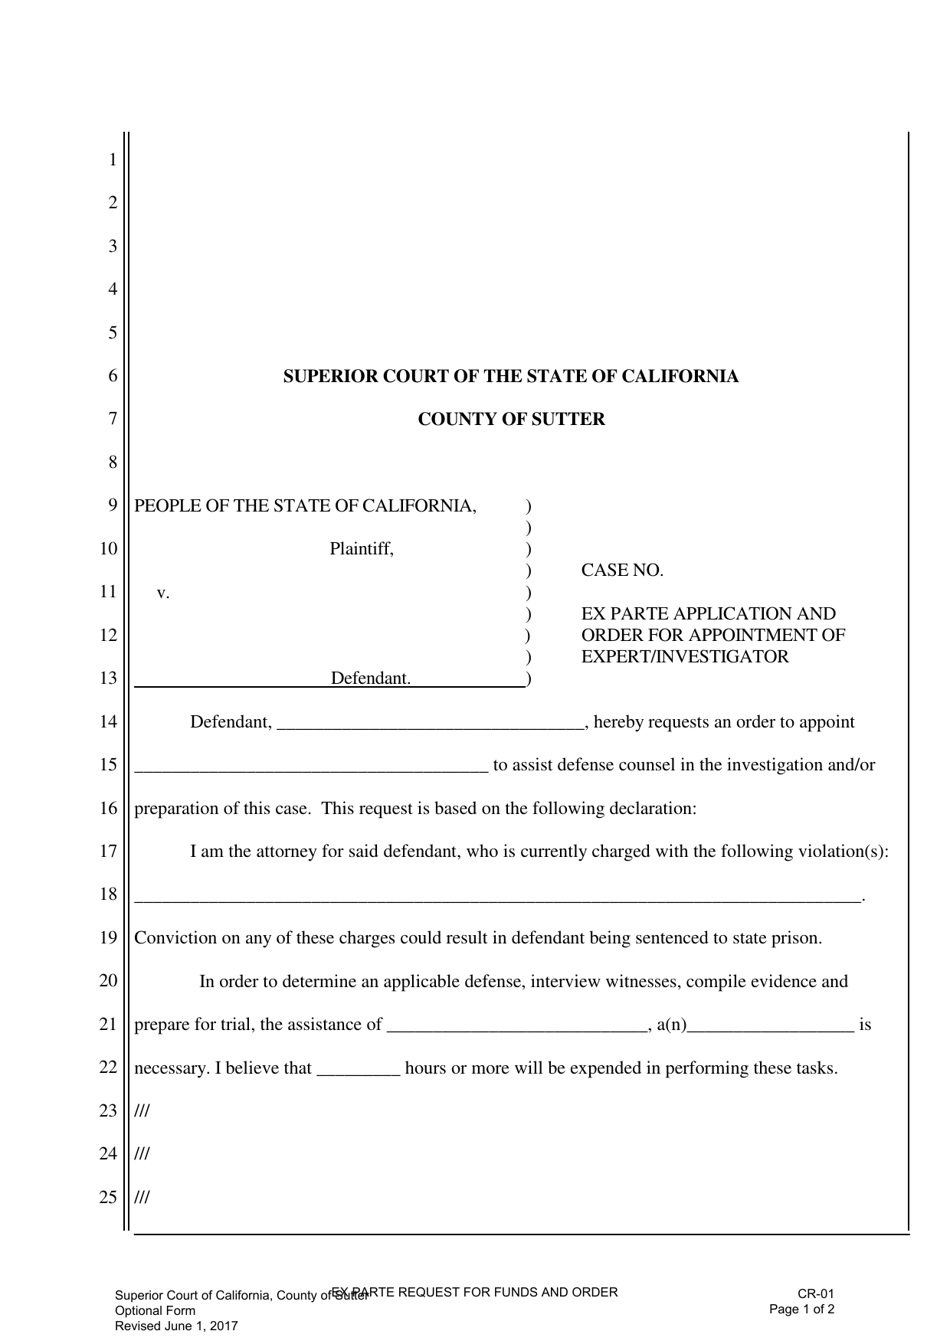 Form CR-01 Ex Parte Application and Order for Appointment of Expert / Investigator - County of Sutter, California, Page 1